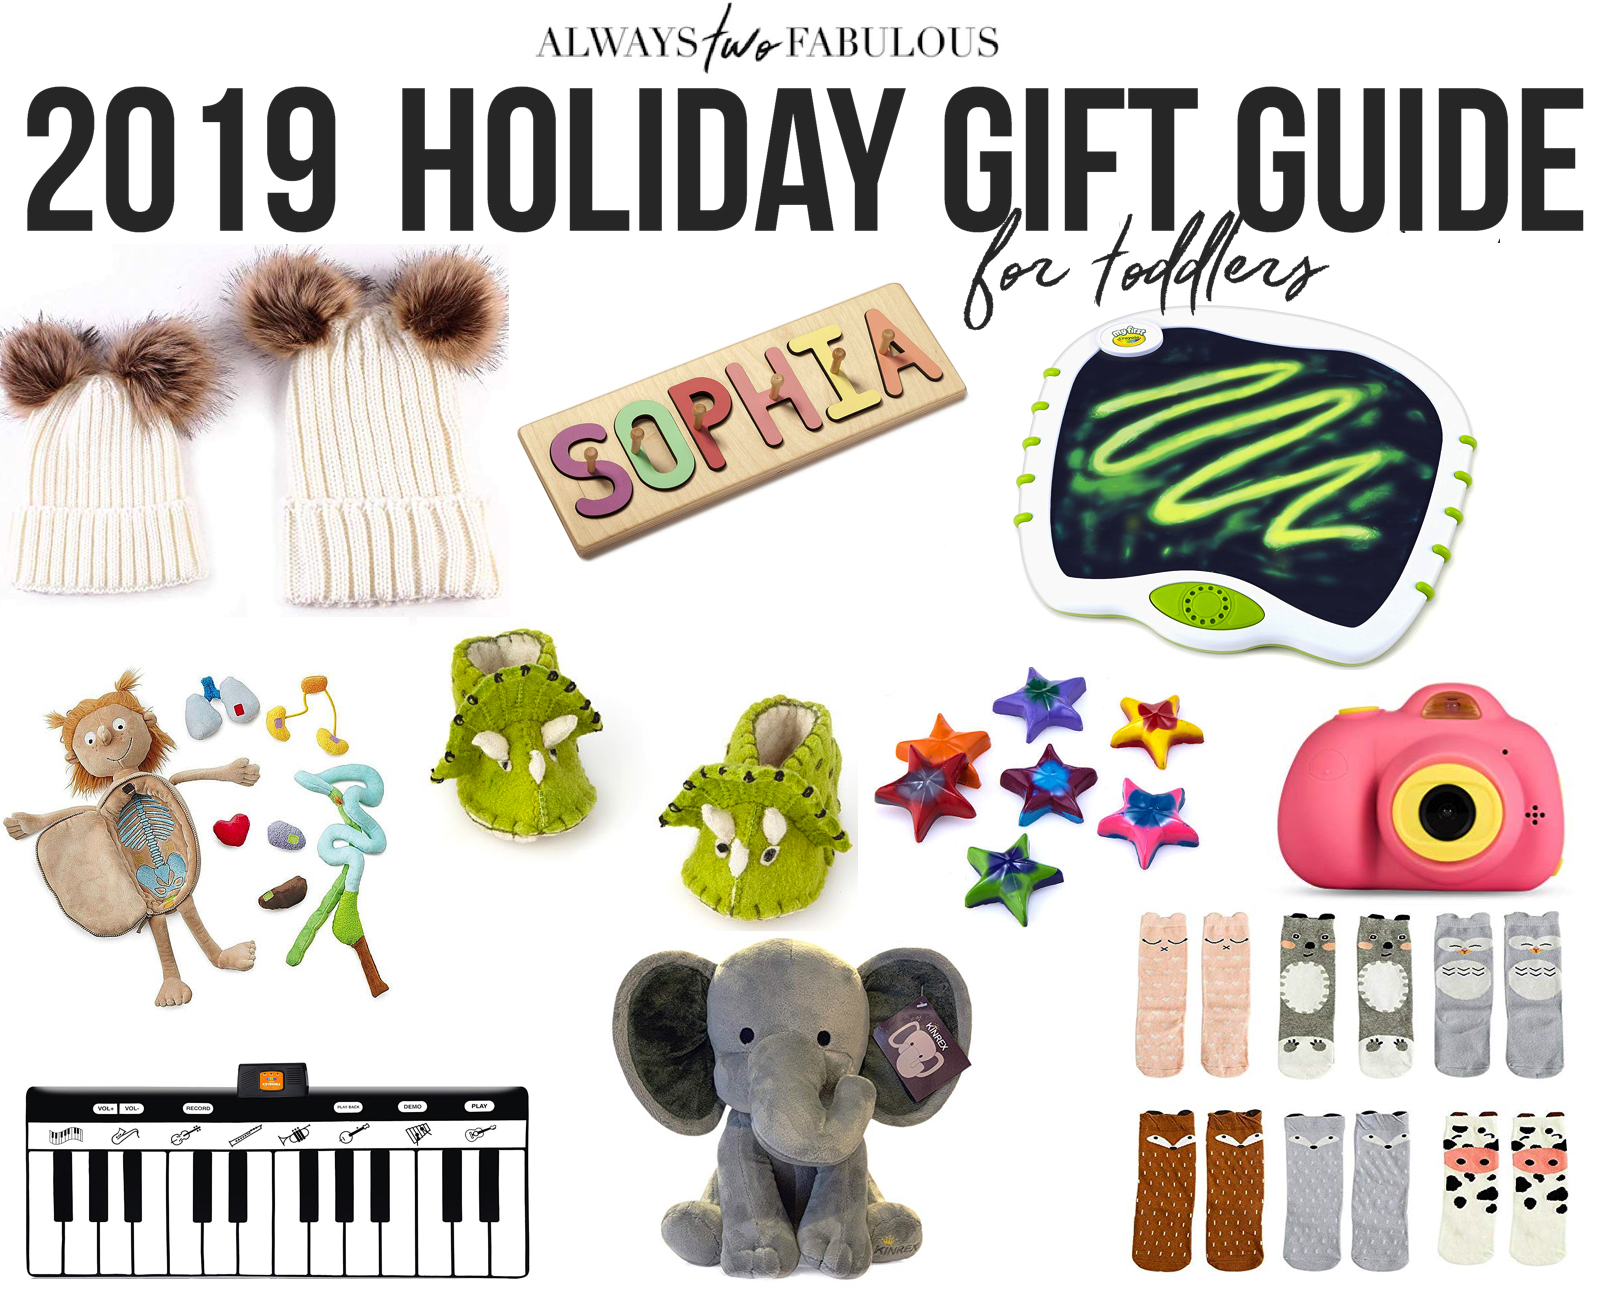 2019 HOLIDAY GIFT GUIDE FOR TODDLER